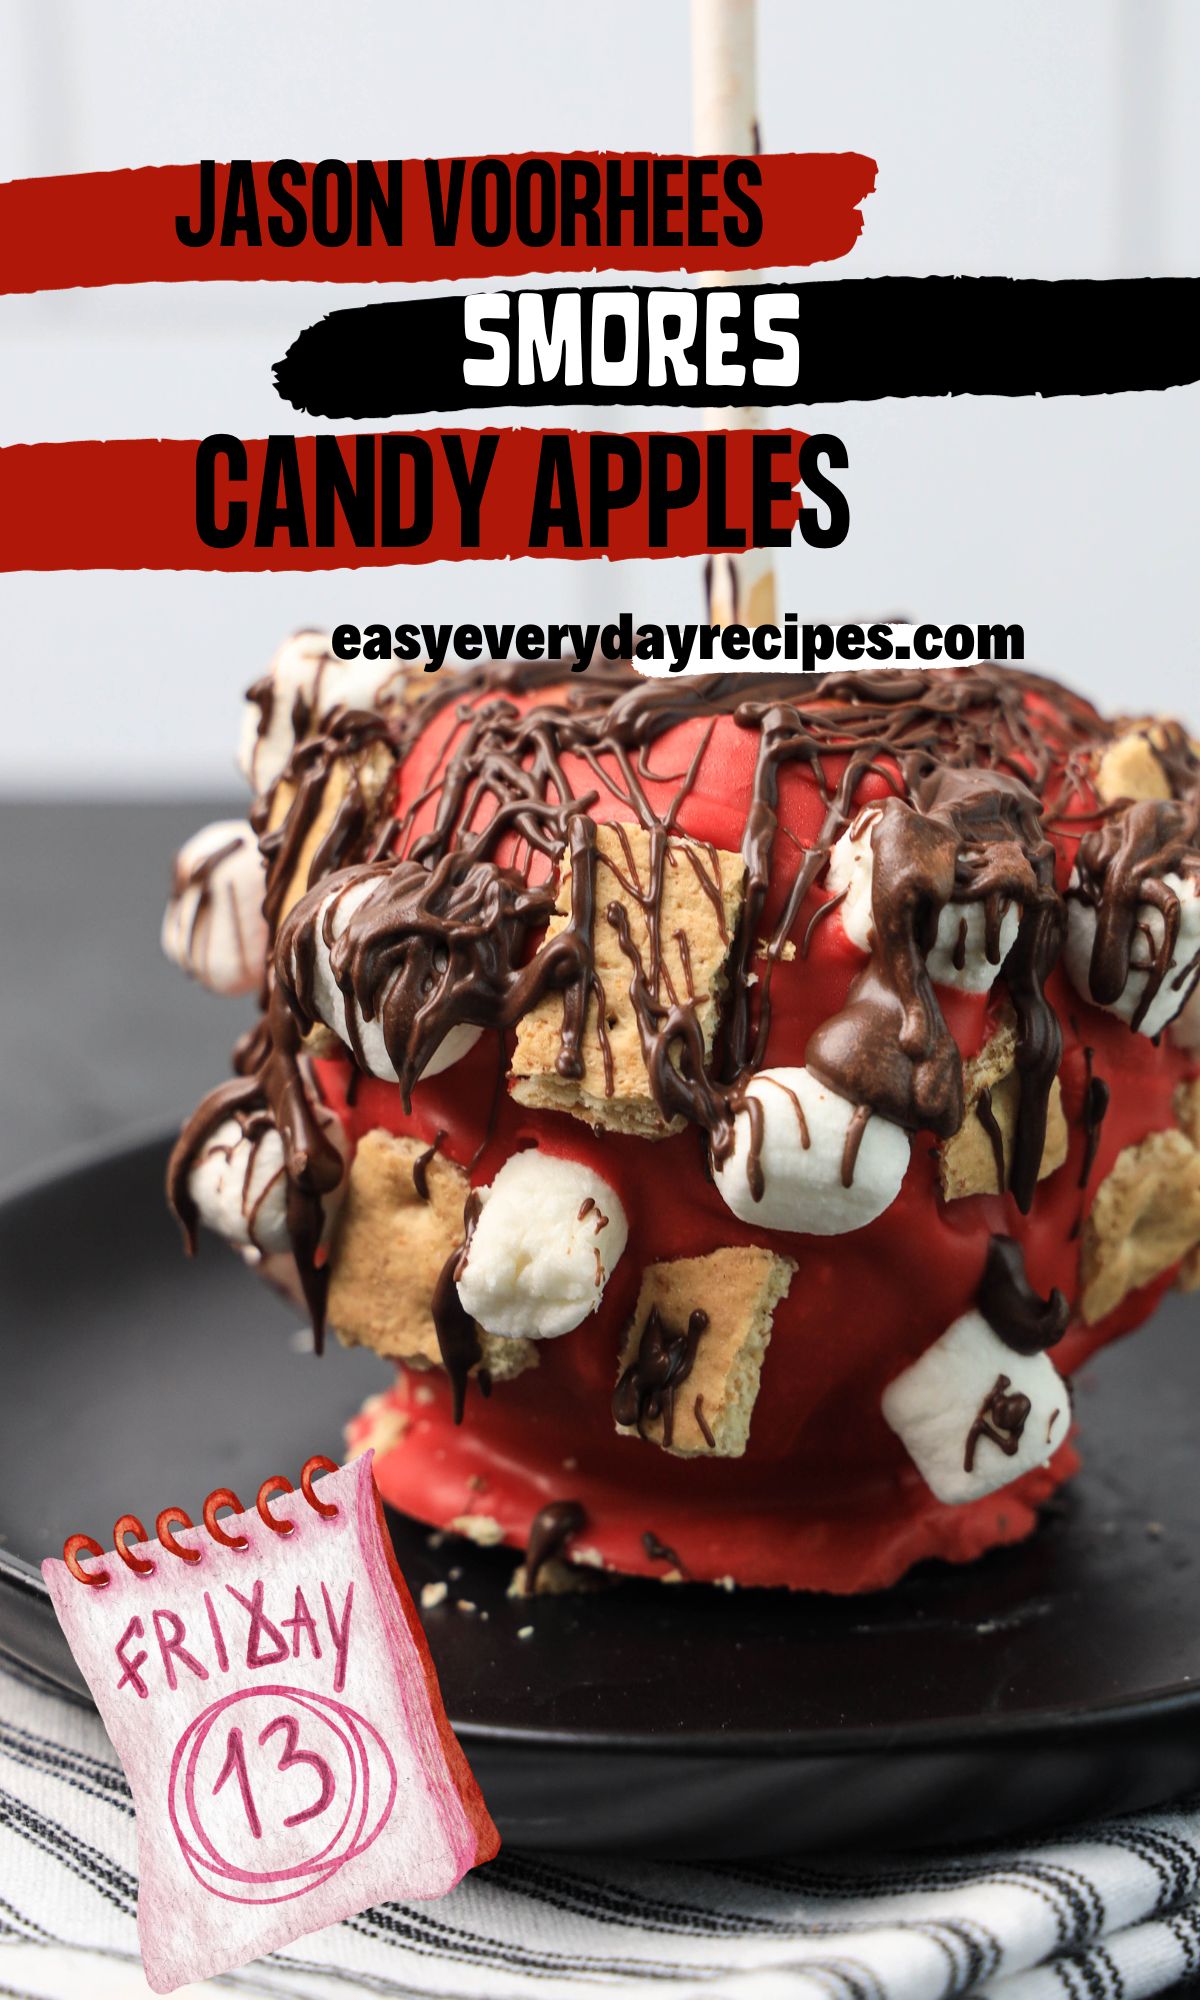 A s'mores candy apple with the text jason wolfers s'mores candy apples.